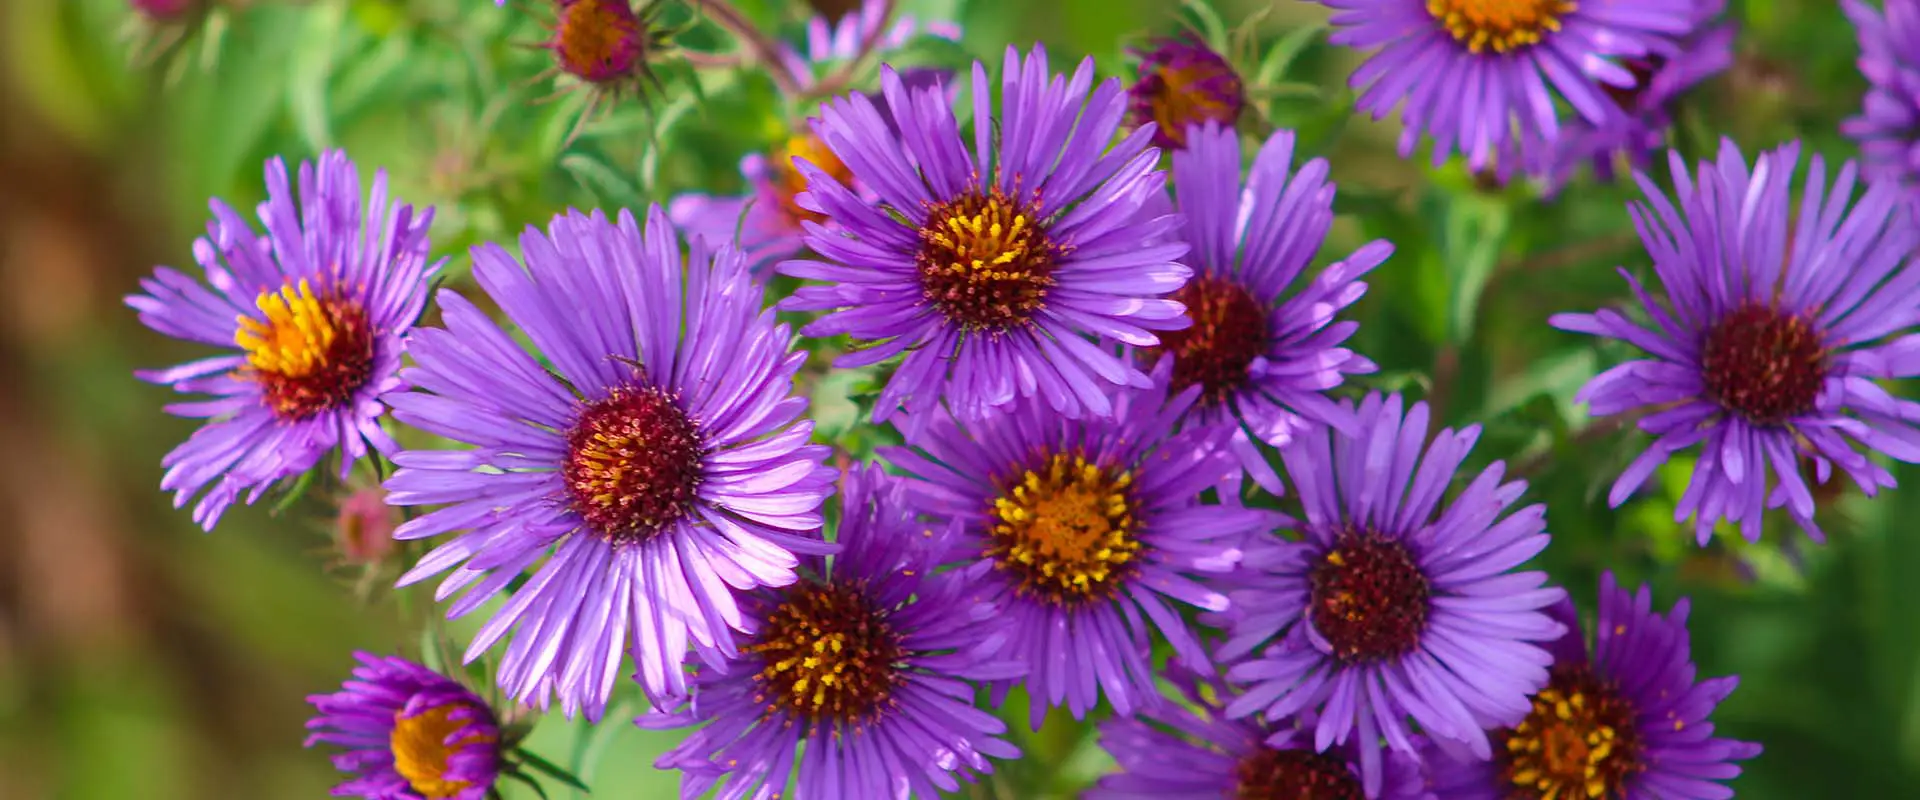 Asters Late-blooming Perennials in Zones 6 and 7